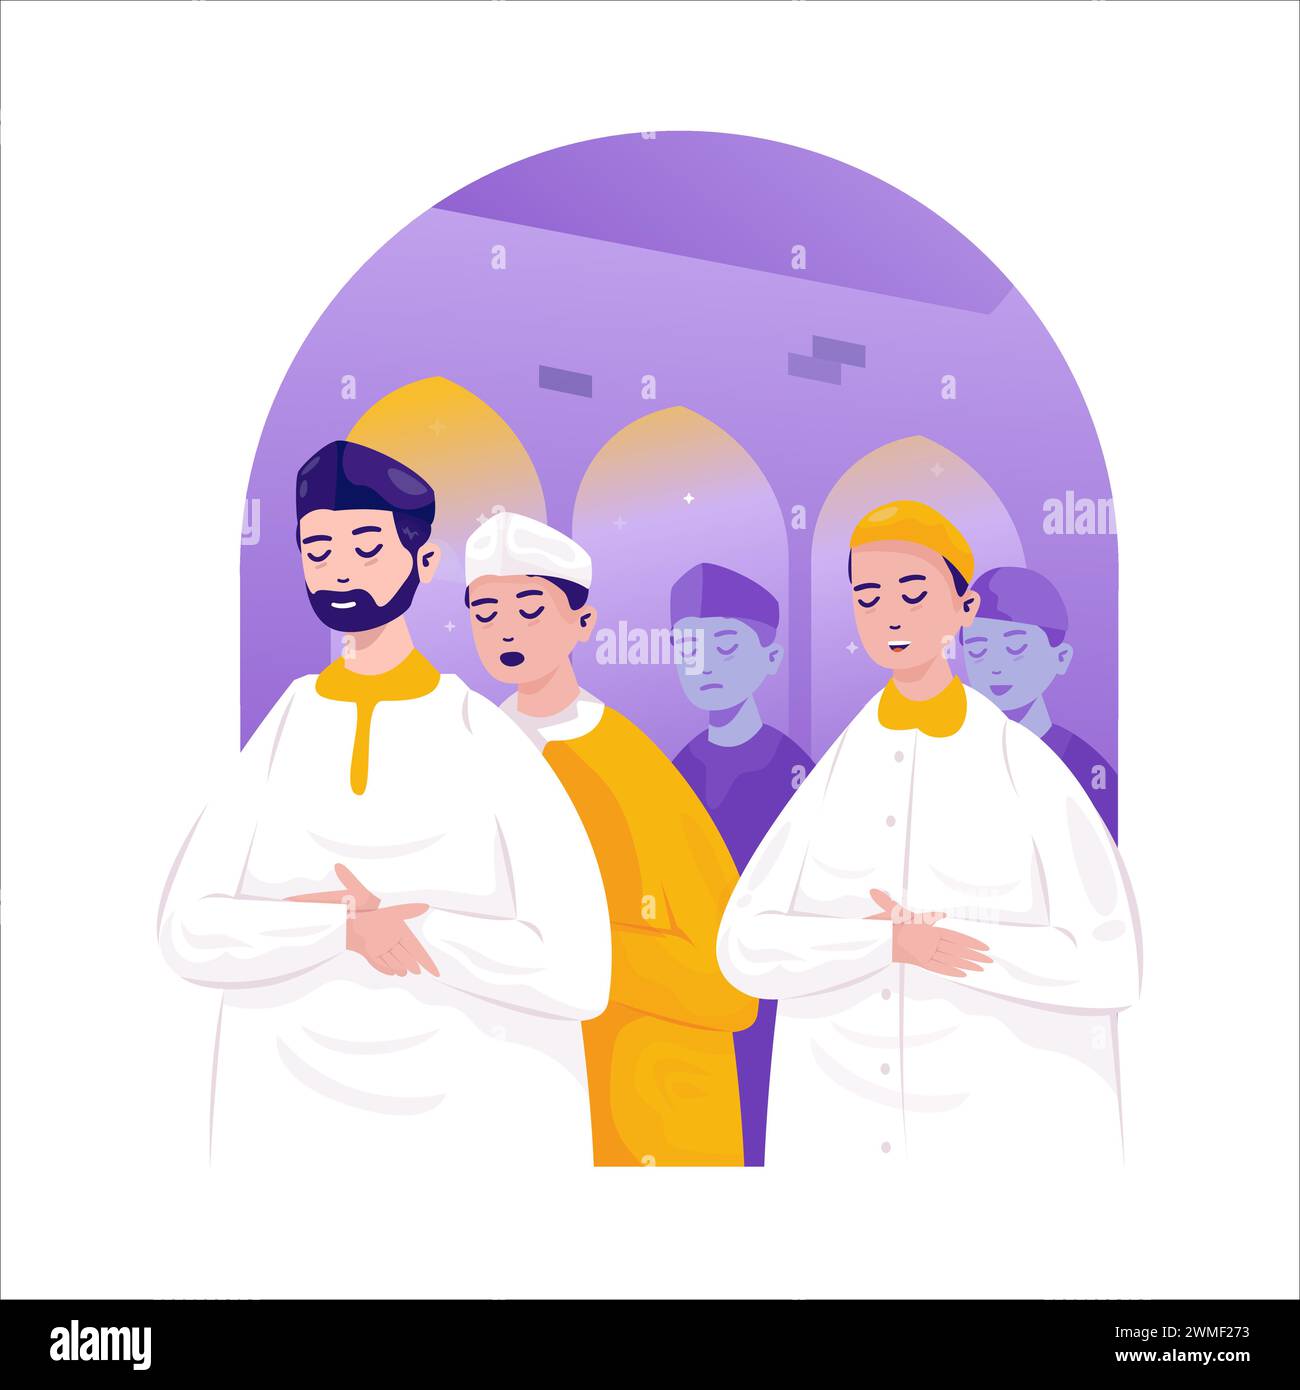 Muslims praying together illustration Stock Vector